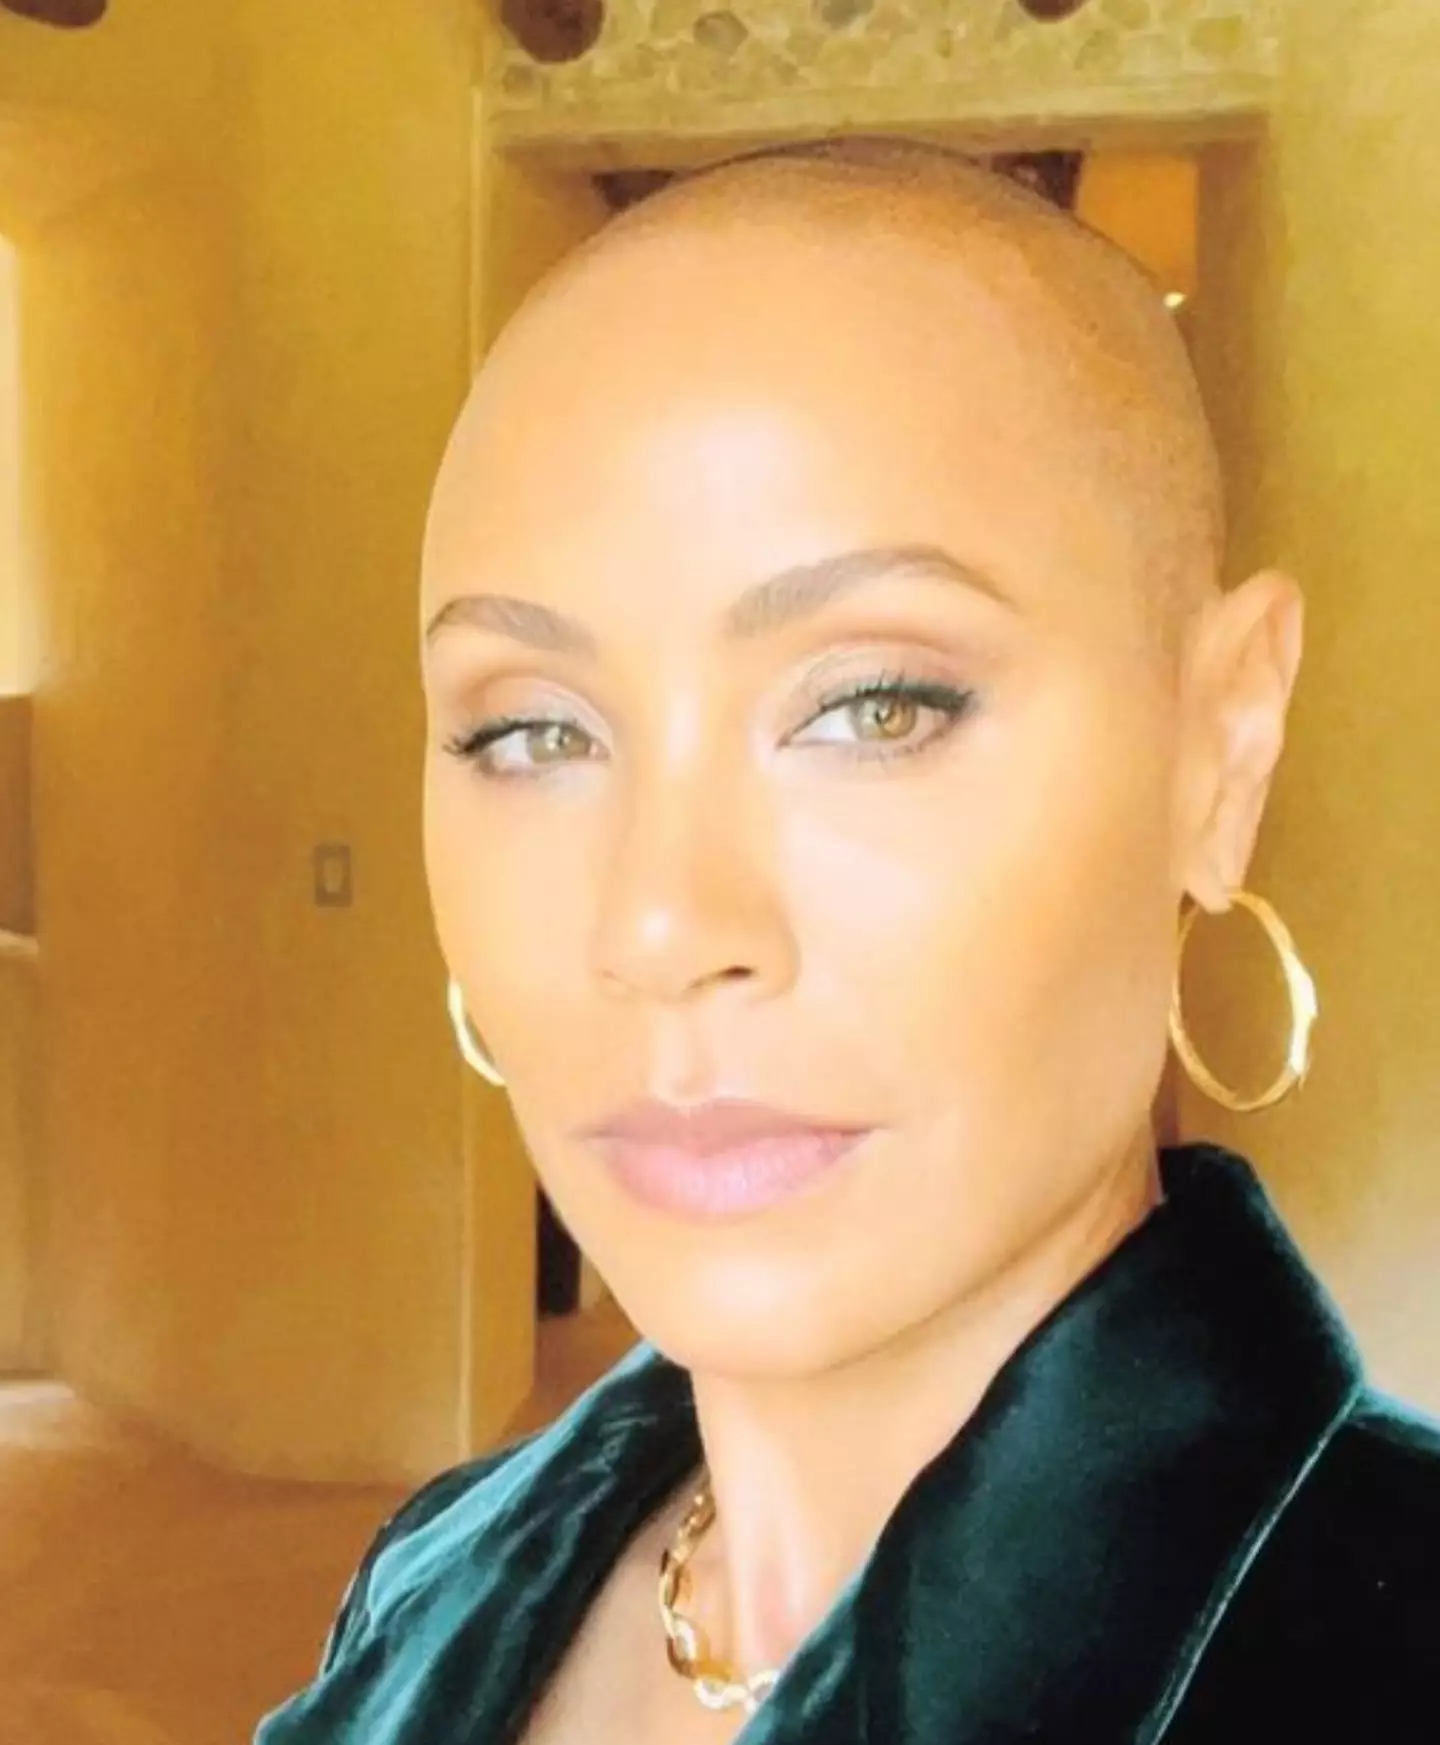 Jada Pinkett Smith has previously opened up about how psychedelics have helped her.